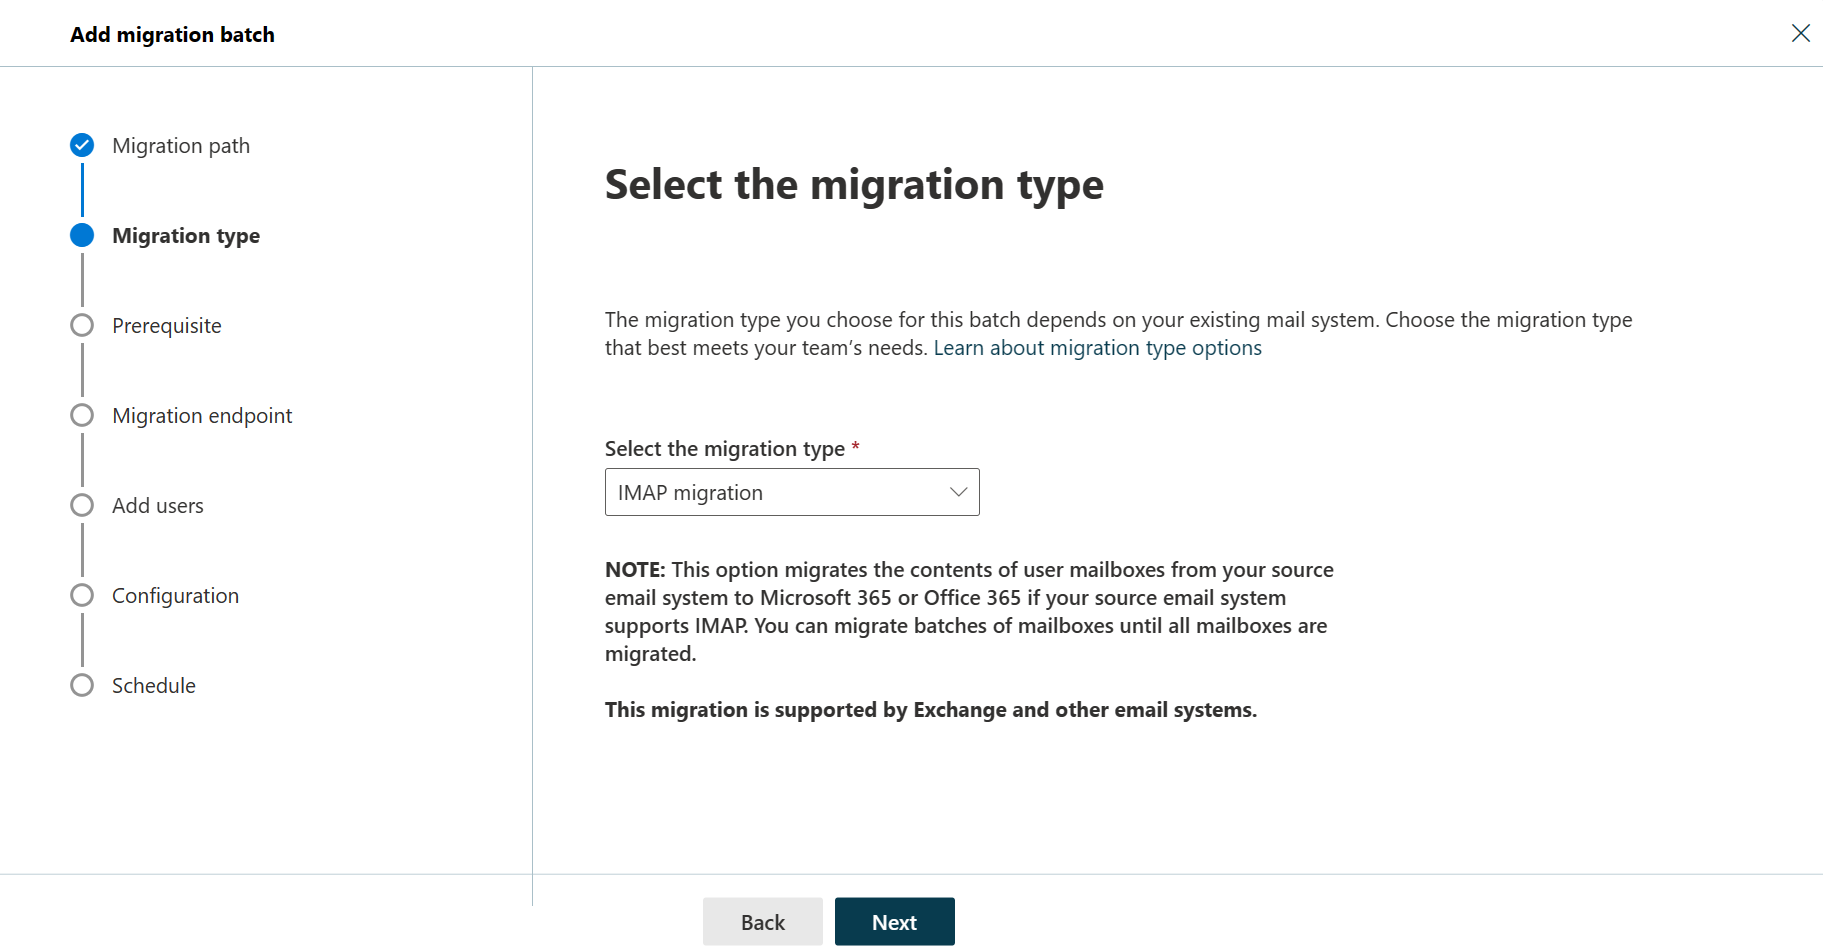 Screenshot of the second step of the migration batch wizard with the migration type selected as IMAP migration.